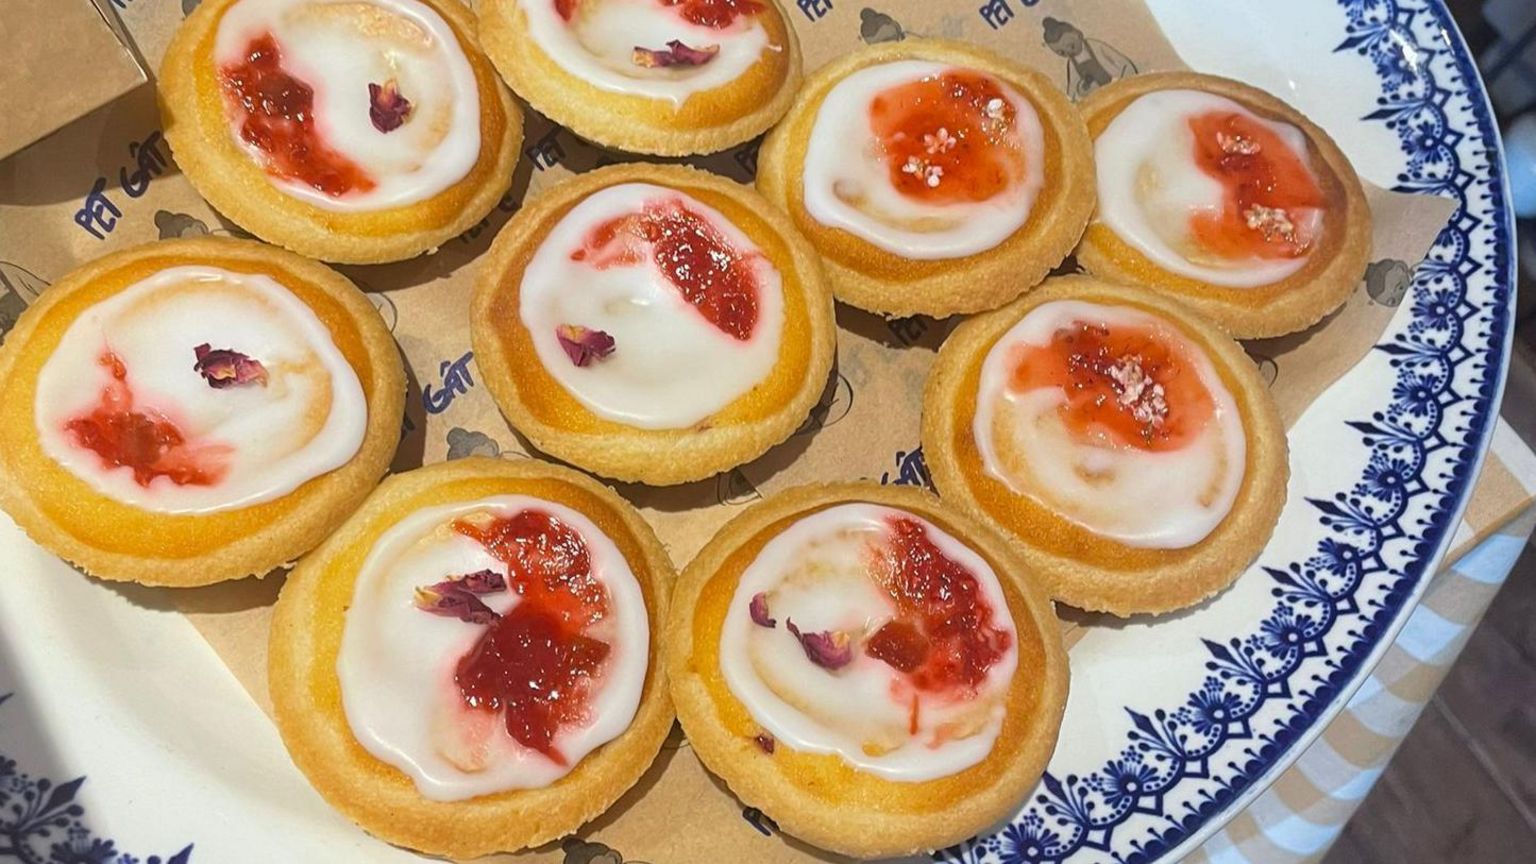 Iced tarts with a red jam finish on a blue and white ceramic plate